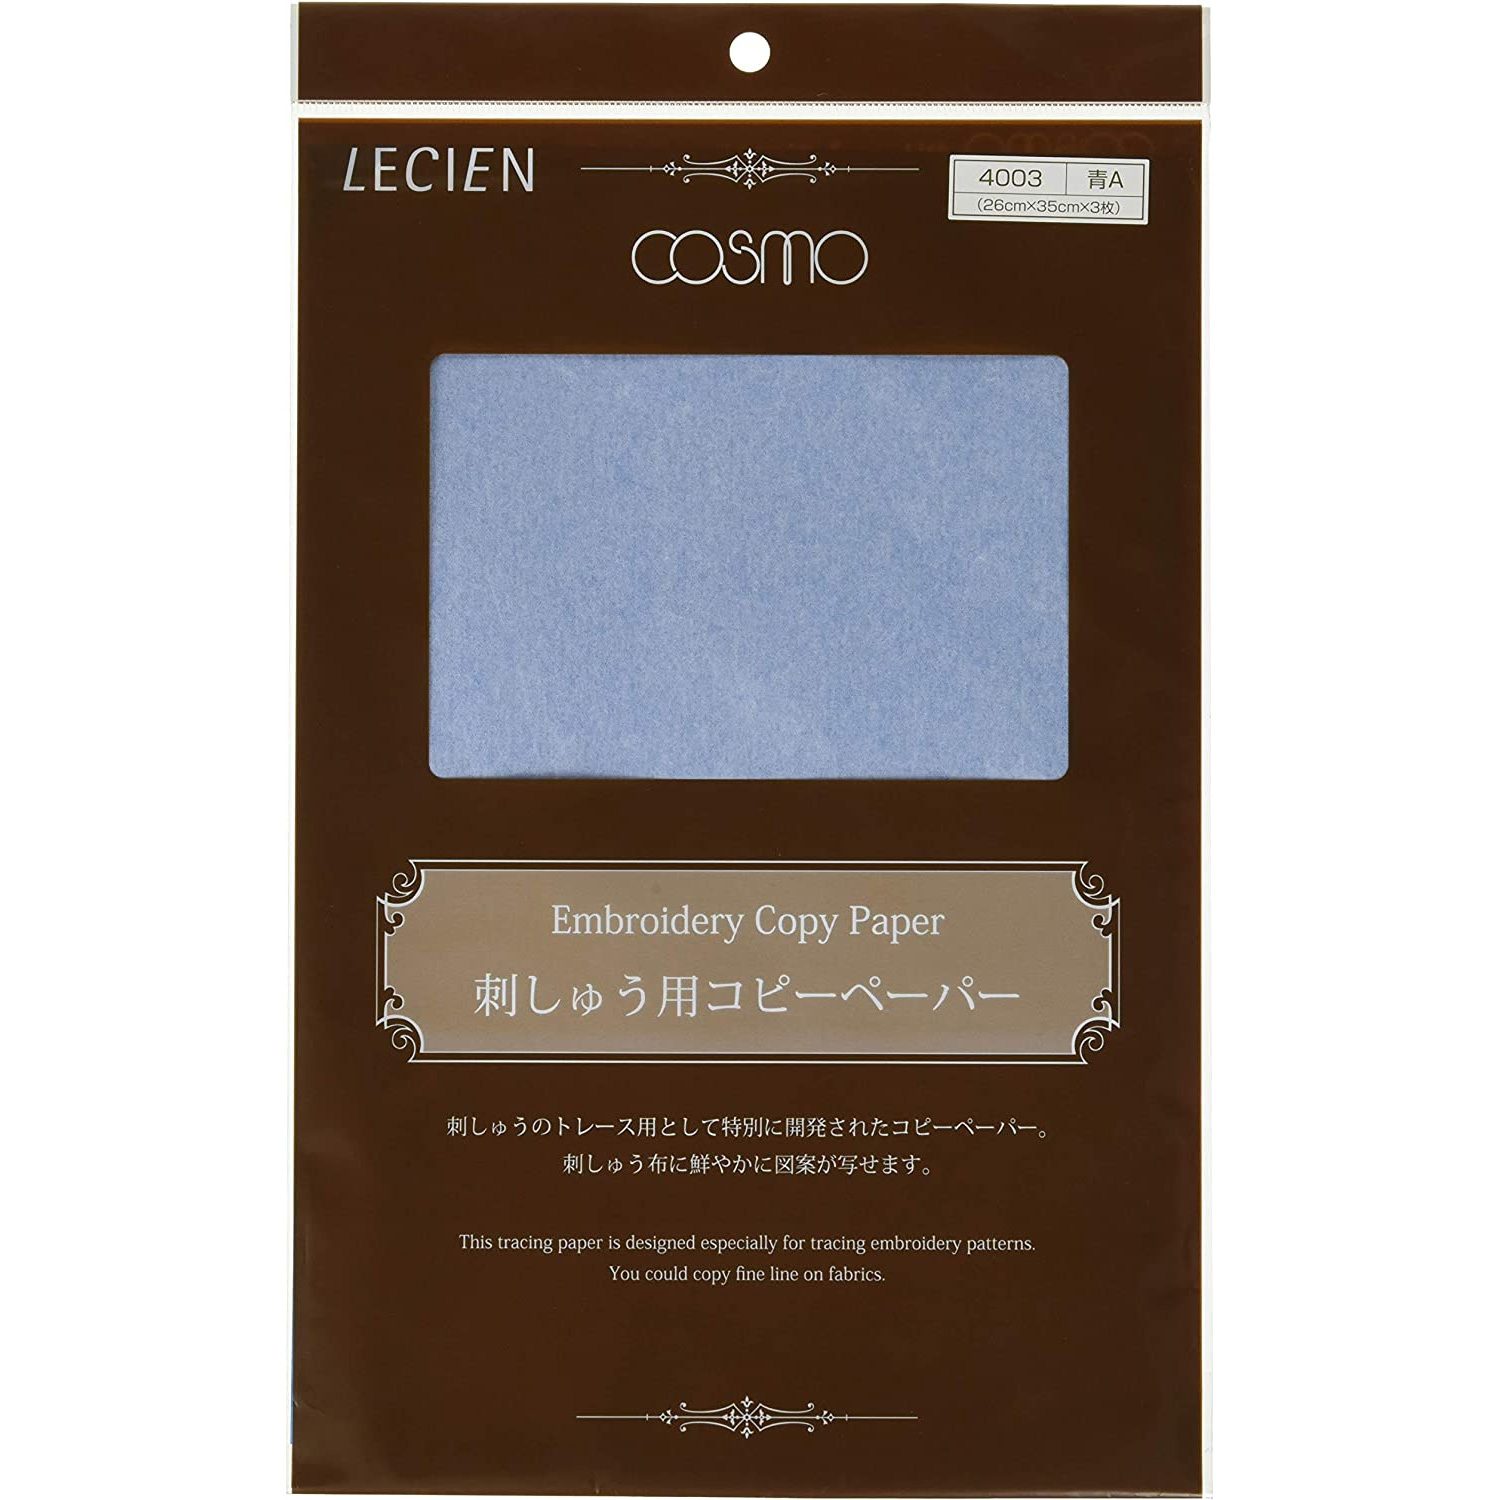 COT4003 Lecien Cosmo Transfer Paper for Embroidery"", blue (3pcs/pk)